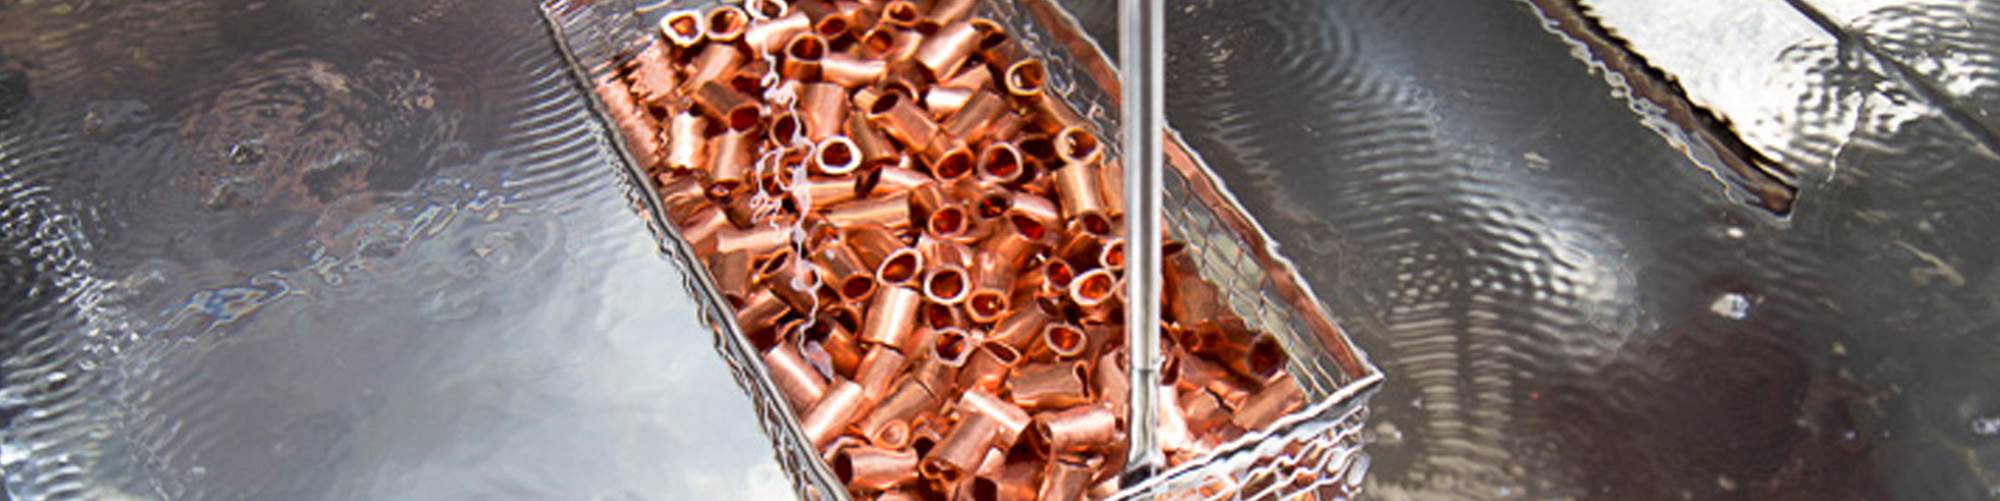 The Right Chemistry Can Improve a Parts Cleaning Process | Production Machining